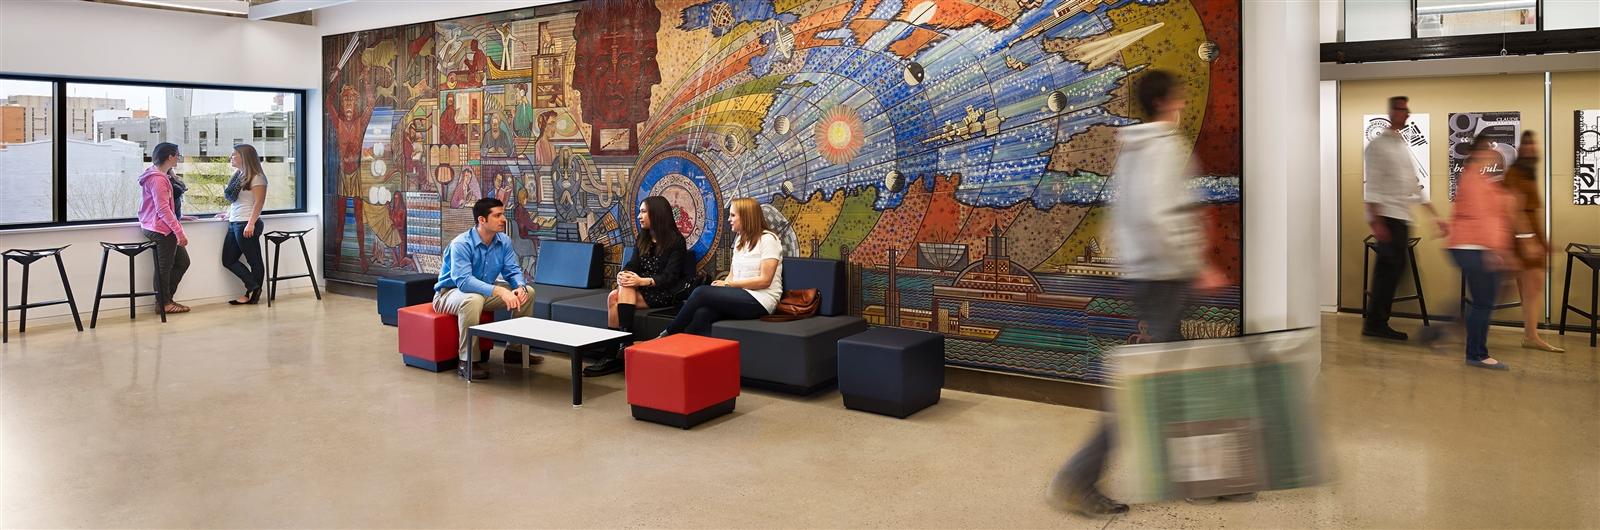 Students sitting in front of an indoor mural